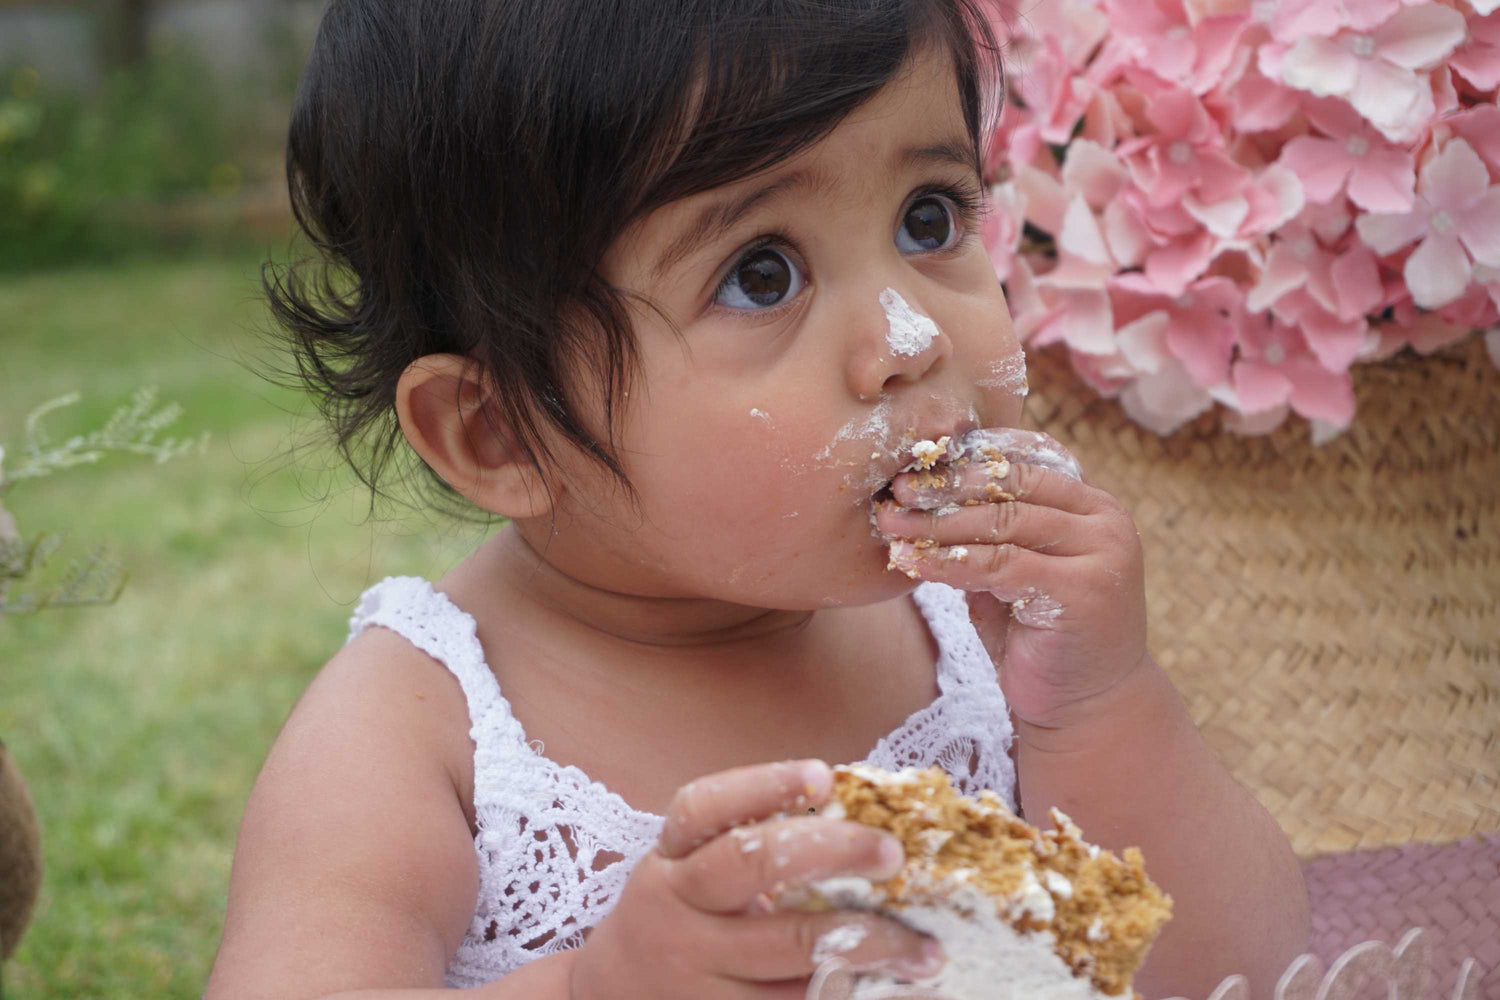 Baby Deeya eating cake with some cream from cake on her face and nose